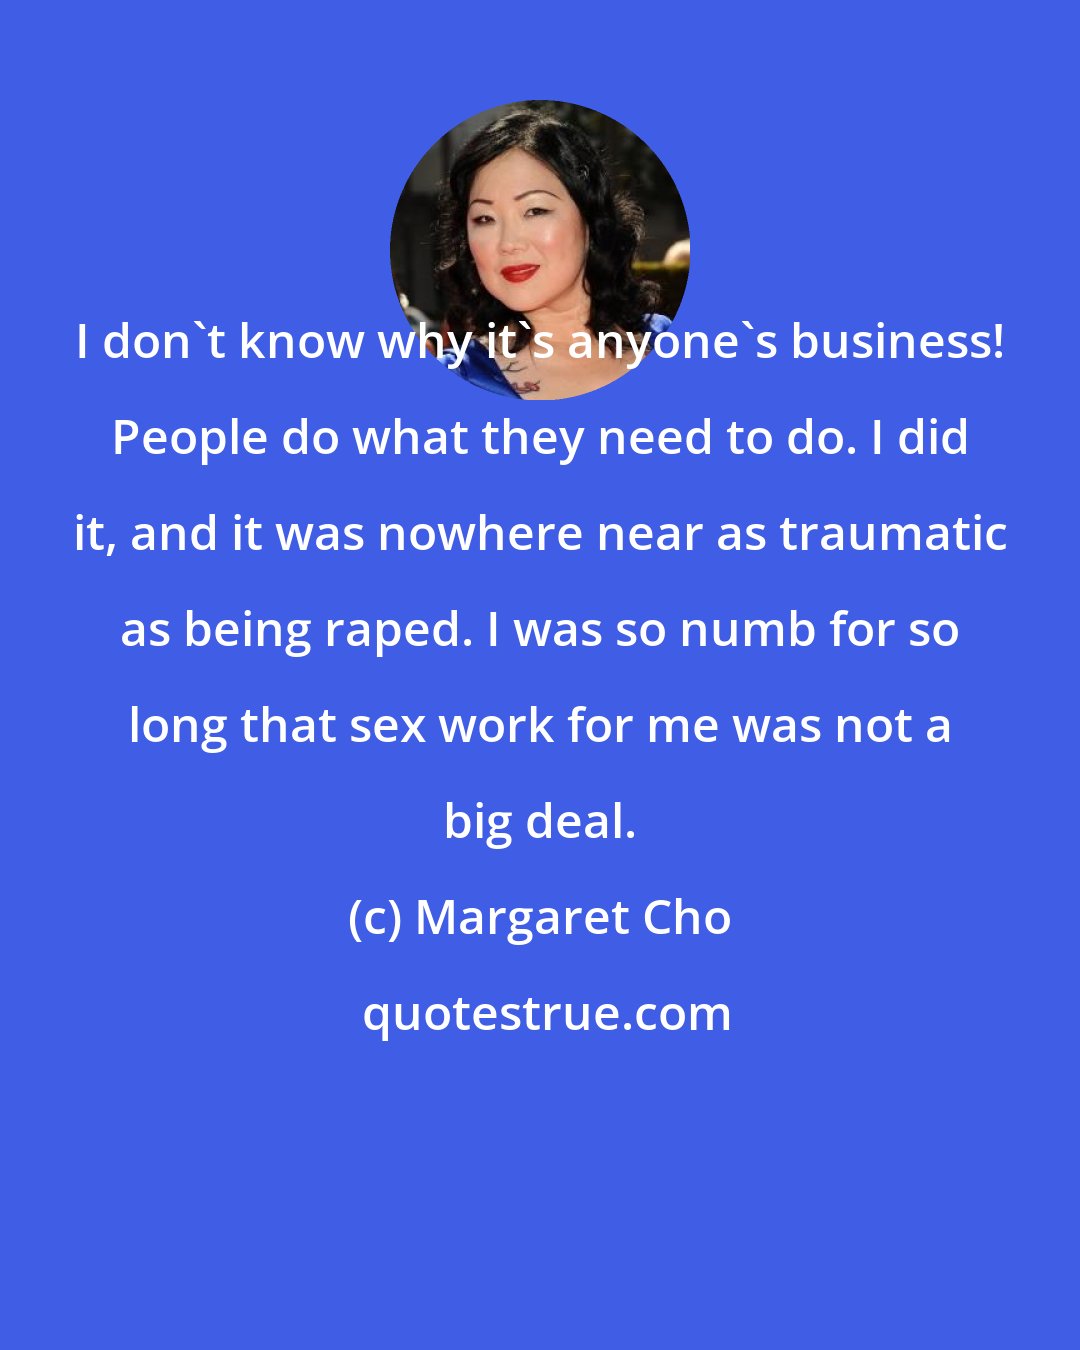 Margaret Cho: I don't know why it's anyone's business! People do what they need to do. I did it, and it was nowhere near as traumatic as being raped. I was so numb for so long that sex work for me was not a big deal.